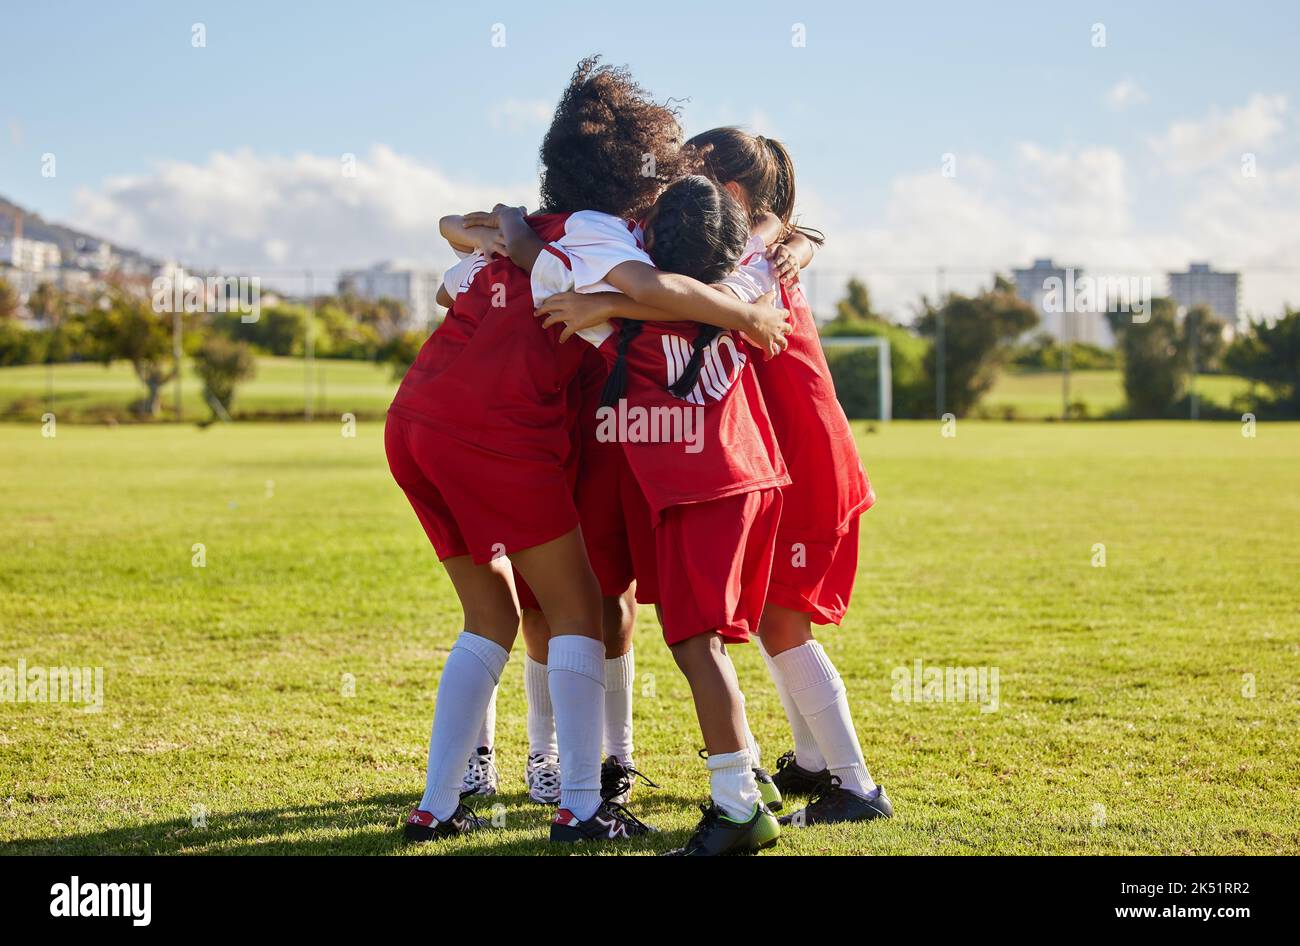 Children, football team and huddle of sports group together on soccer field for celebration of goal, winning and teamwork during a competition match Stock Photo